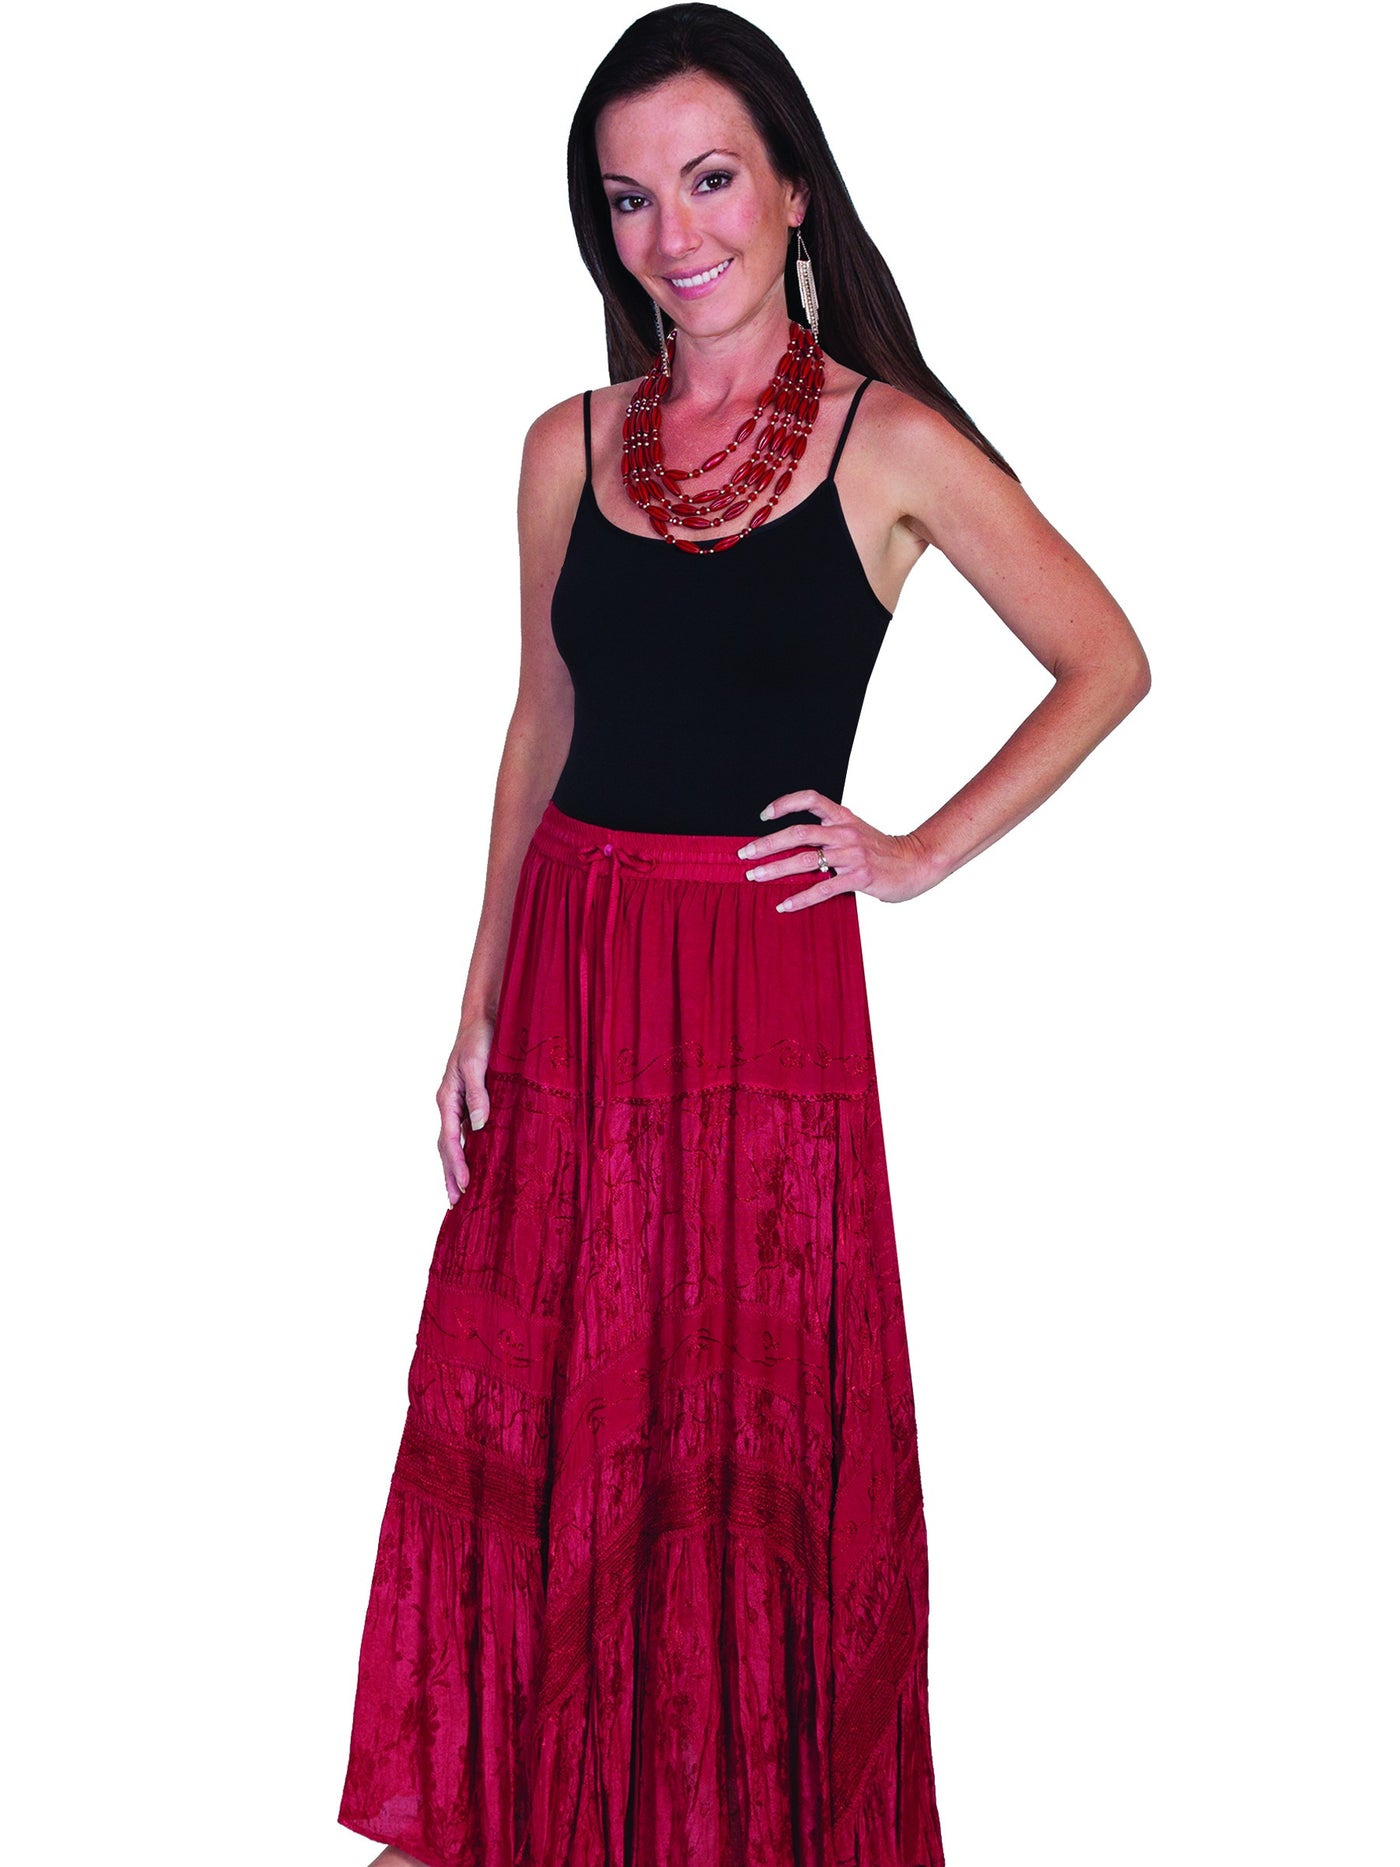 Western Style Full Length Embroidered Skirt in Burgundy - SOLD OUT